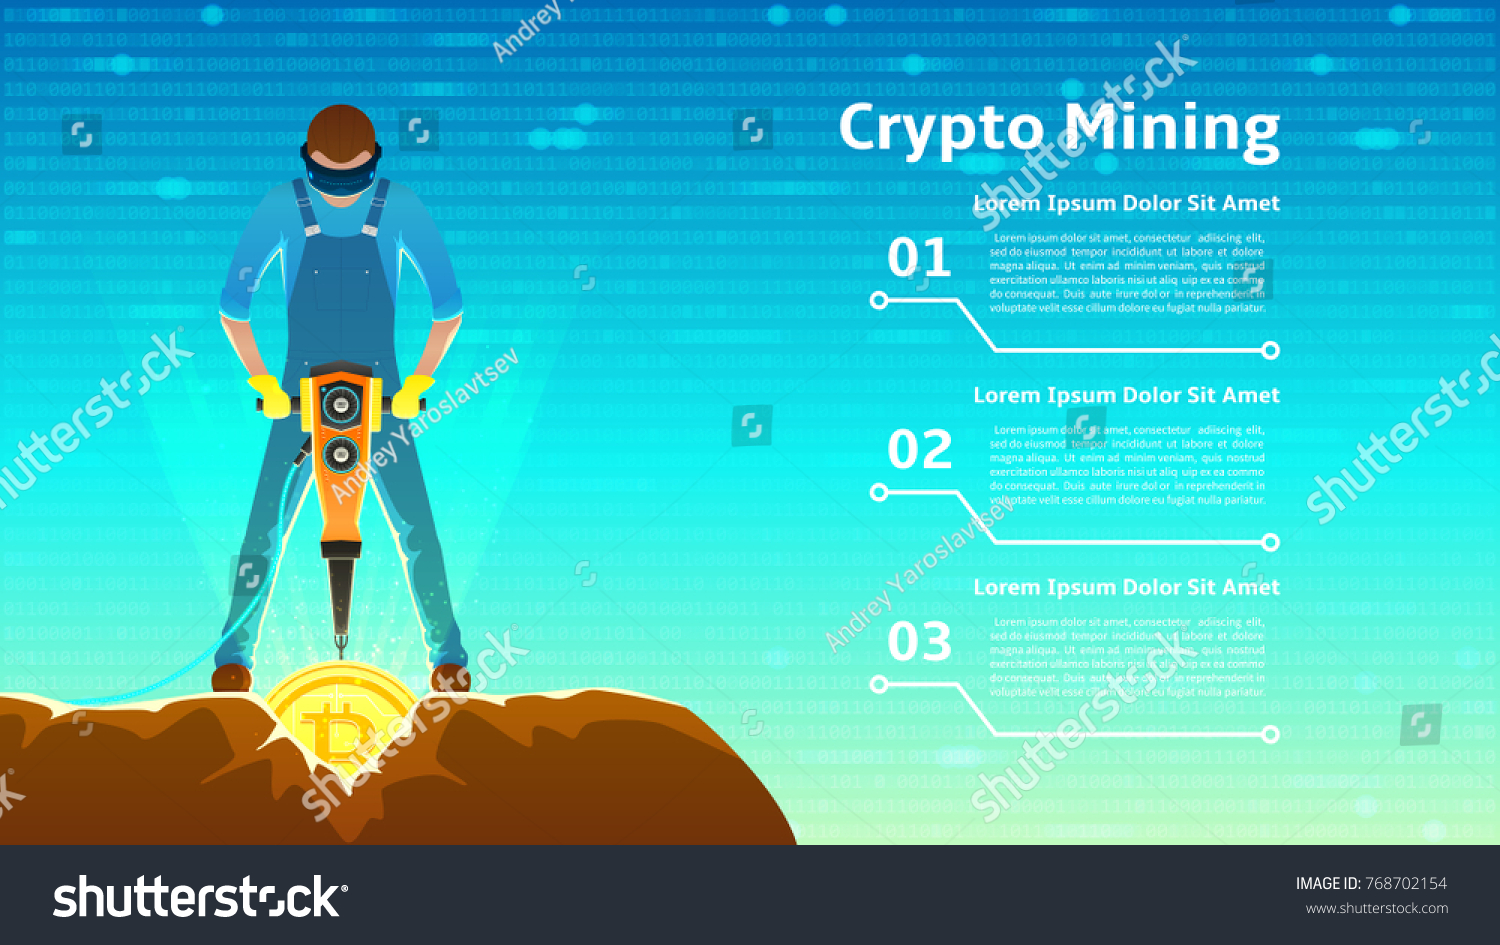 SVG of Man in Virtual Reality Glasses Mining Bitcoins. Modern Concept of Digital Crypto Mining. Person Extracting Coins from Rock with a jackhammer. Vector Illustration with Binary Computer Code. svg